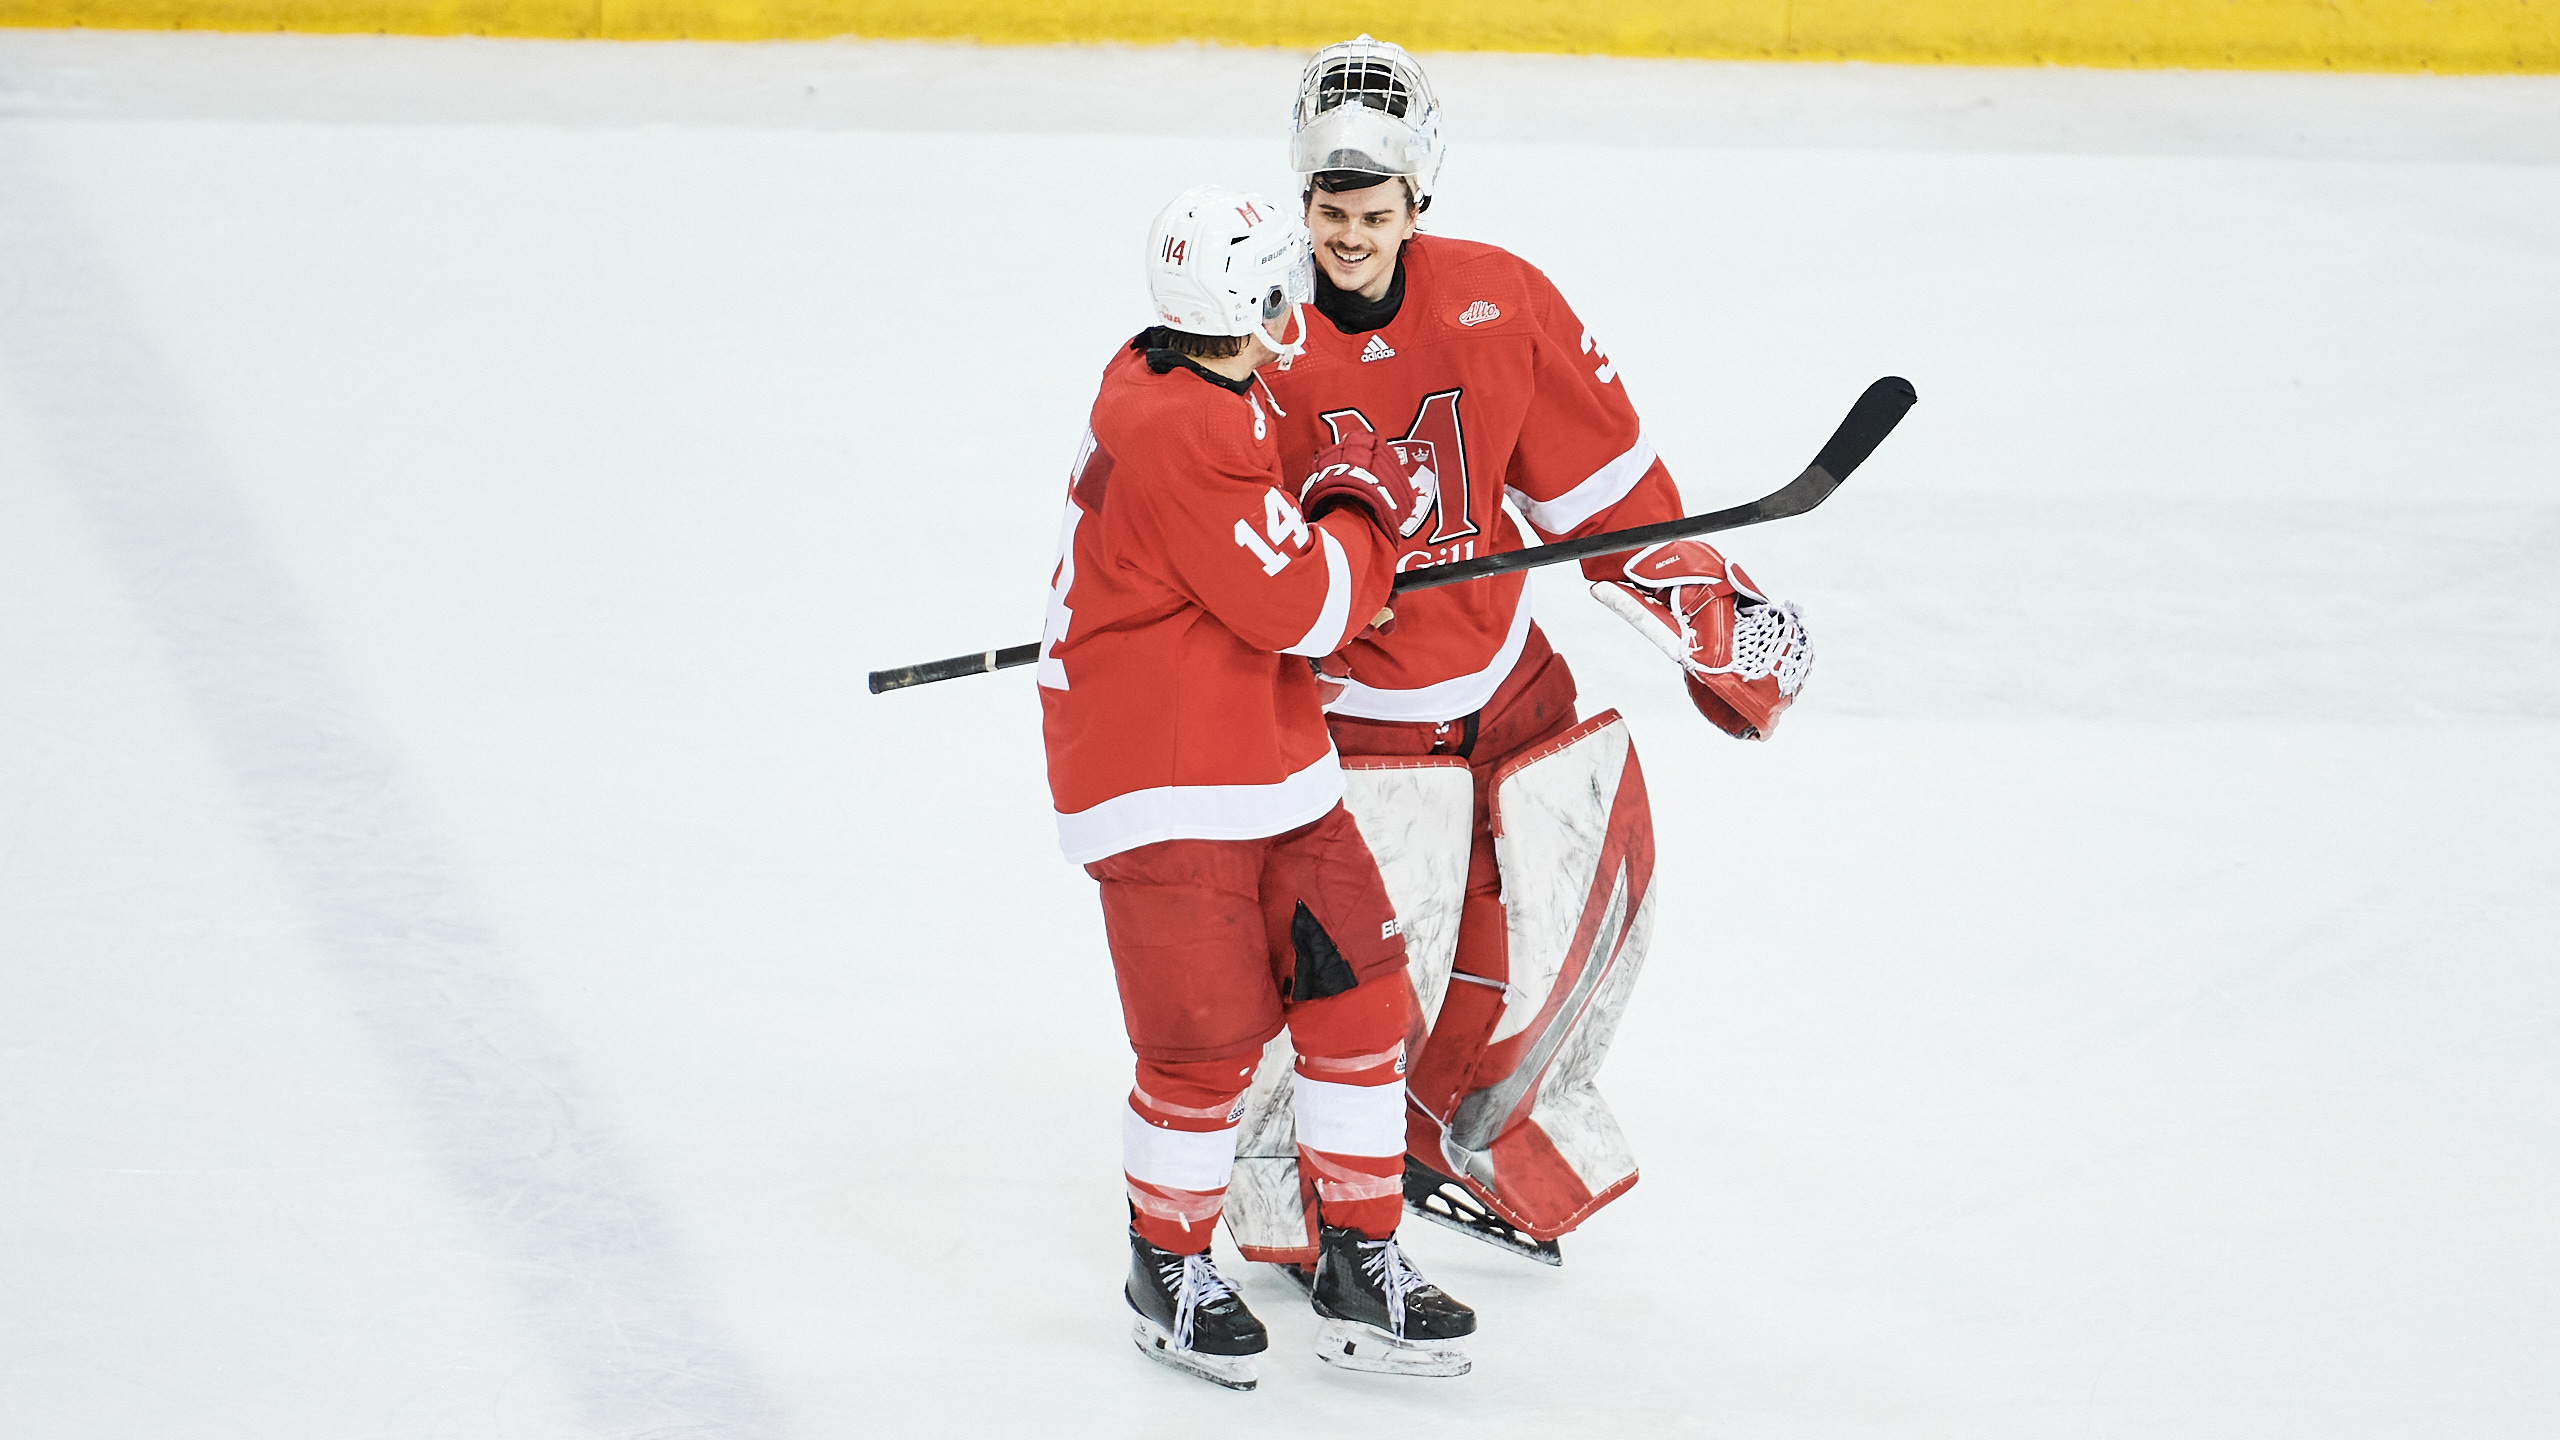 The McGill goaltender chats with his teammate while skating on the ice